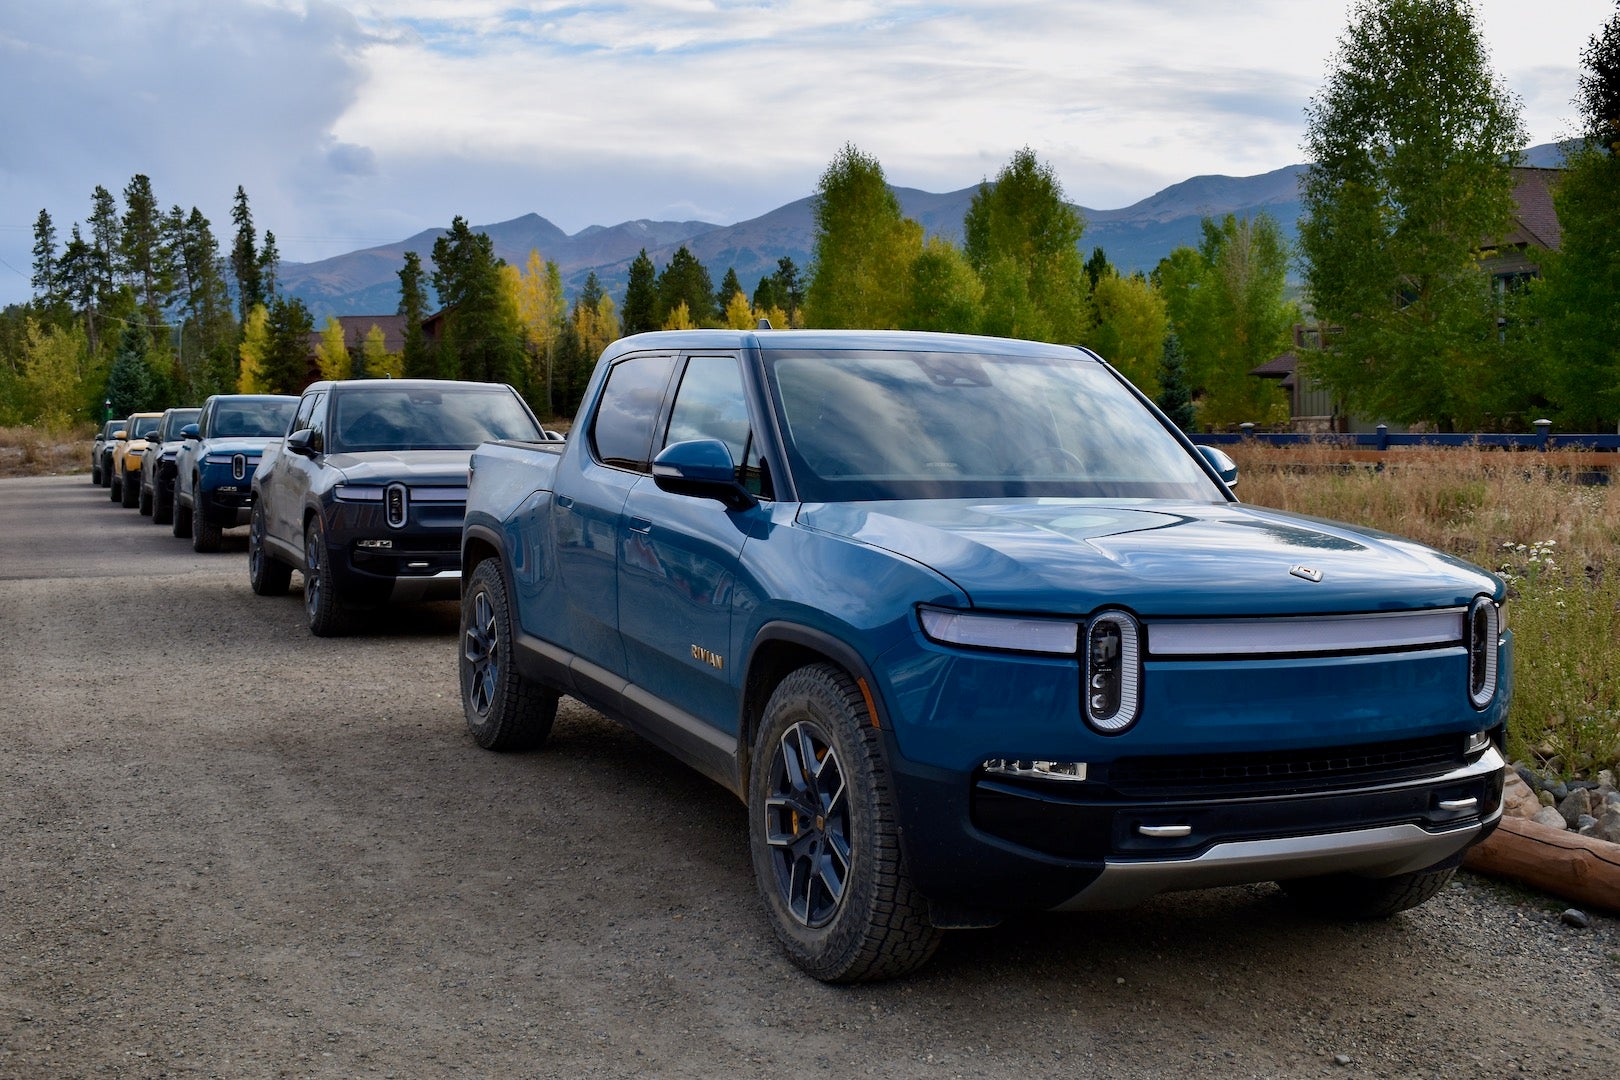 2022 Rivian R1T Launch Edition lined up like ducks in a row